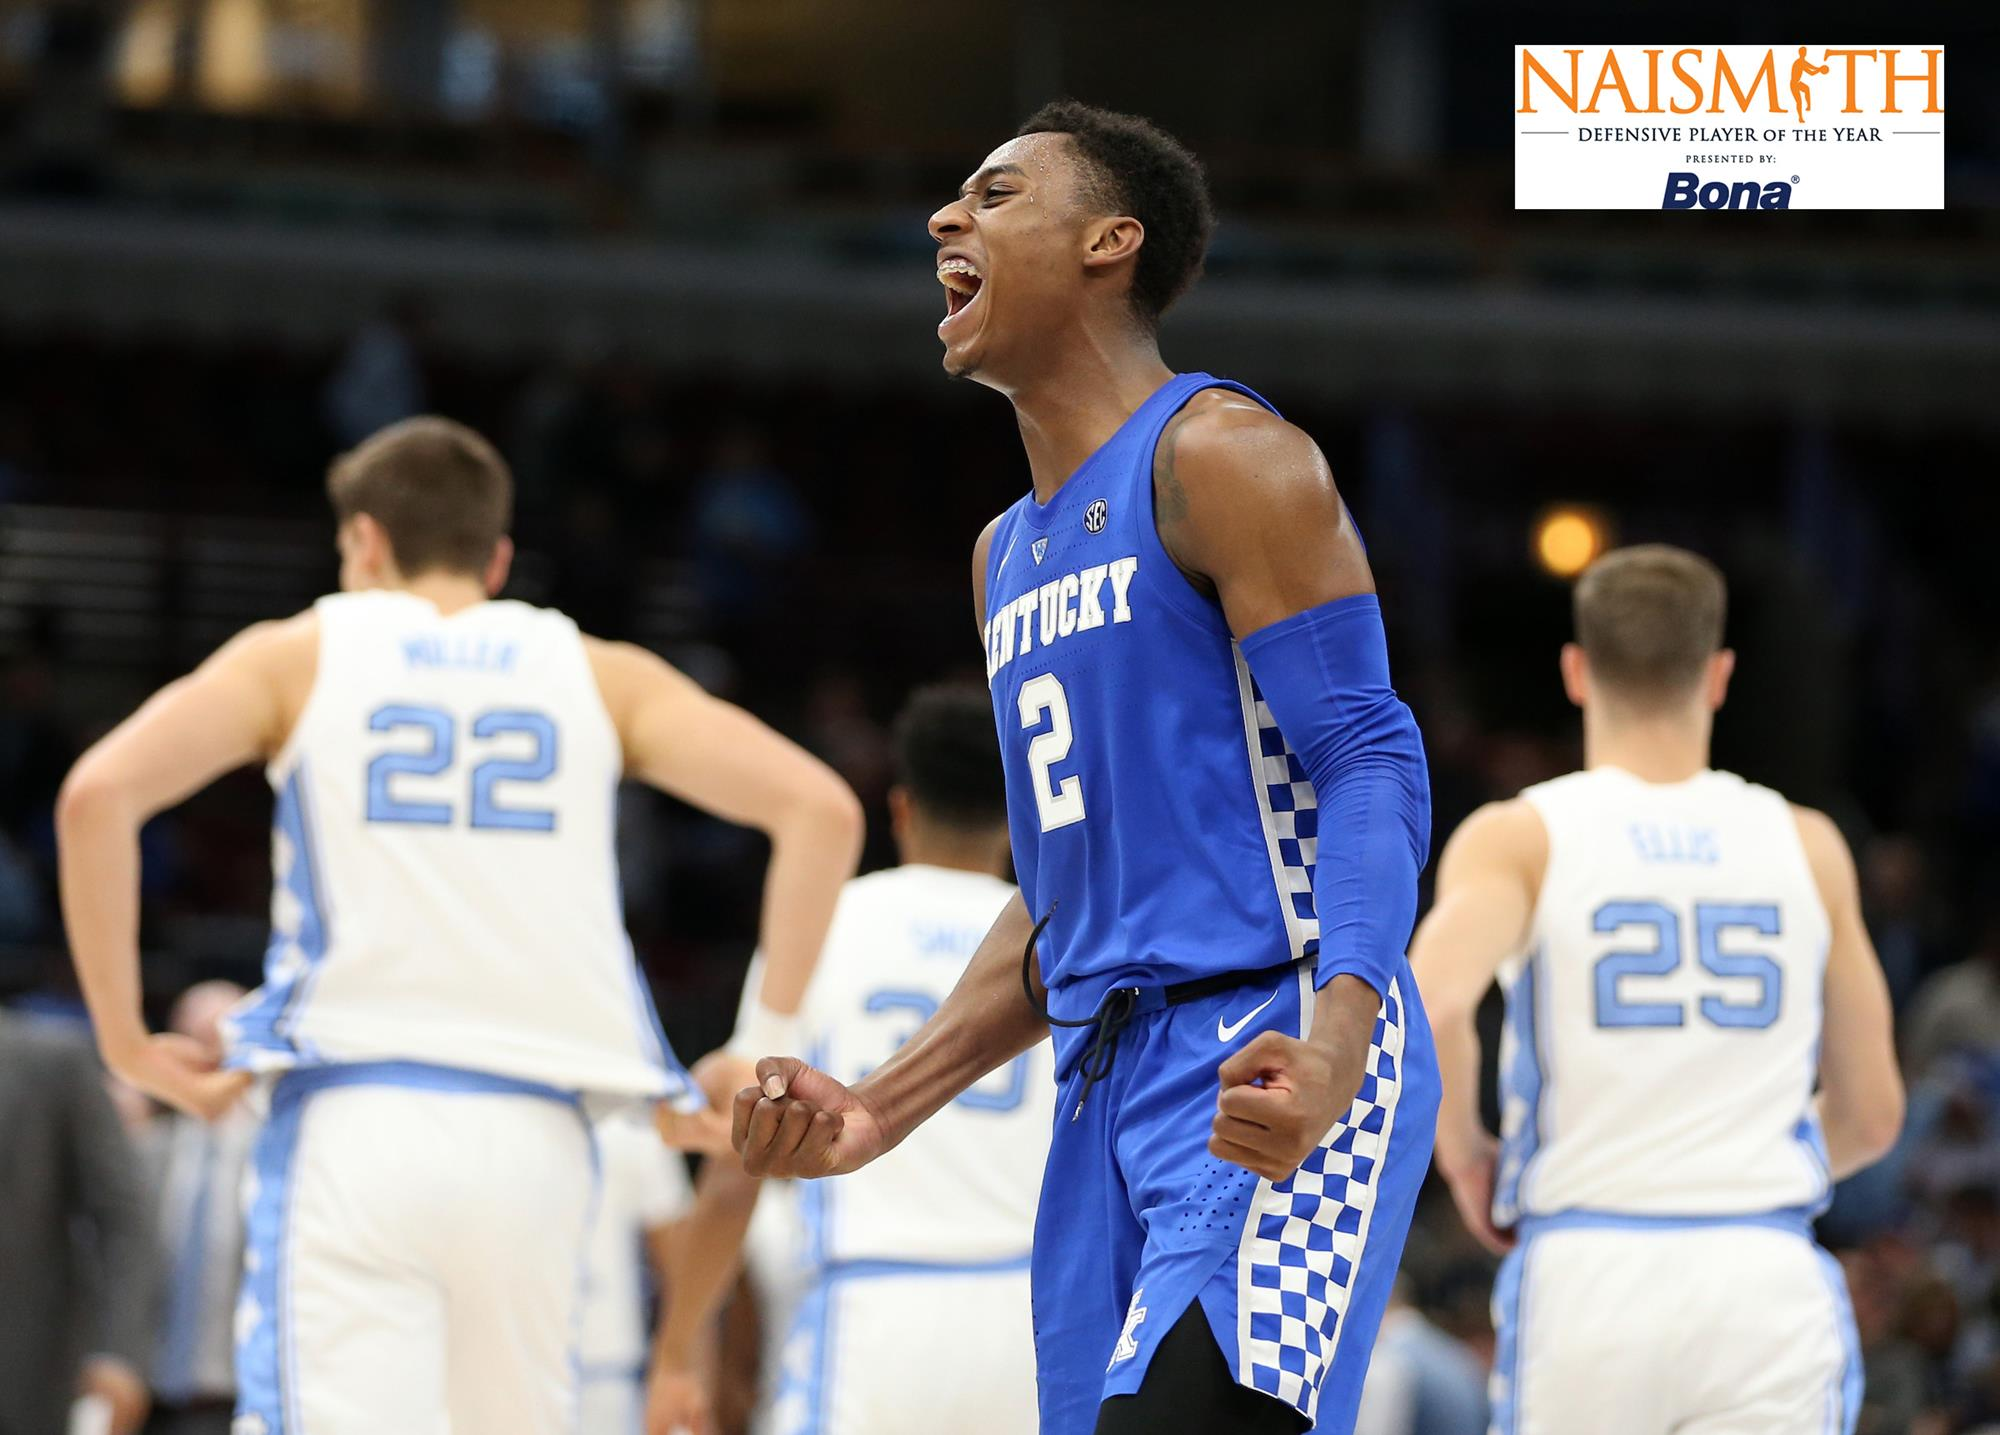 Hagans Tabbed Naismith Defensive Player of the Year Candidate